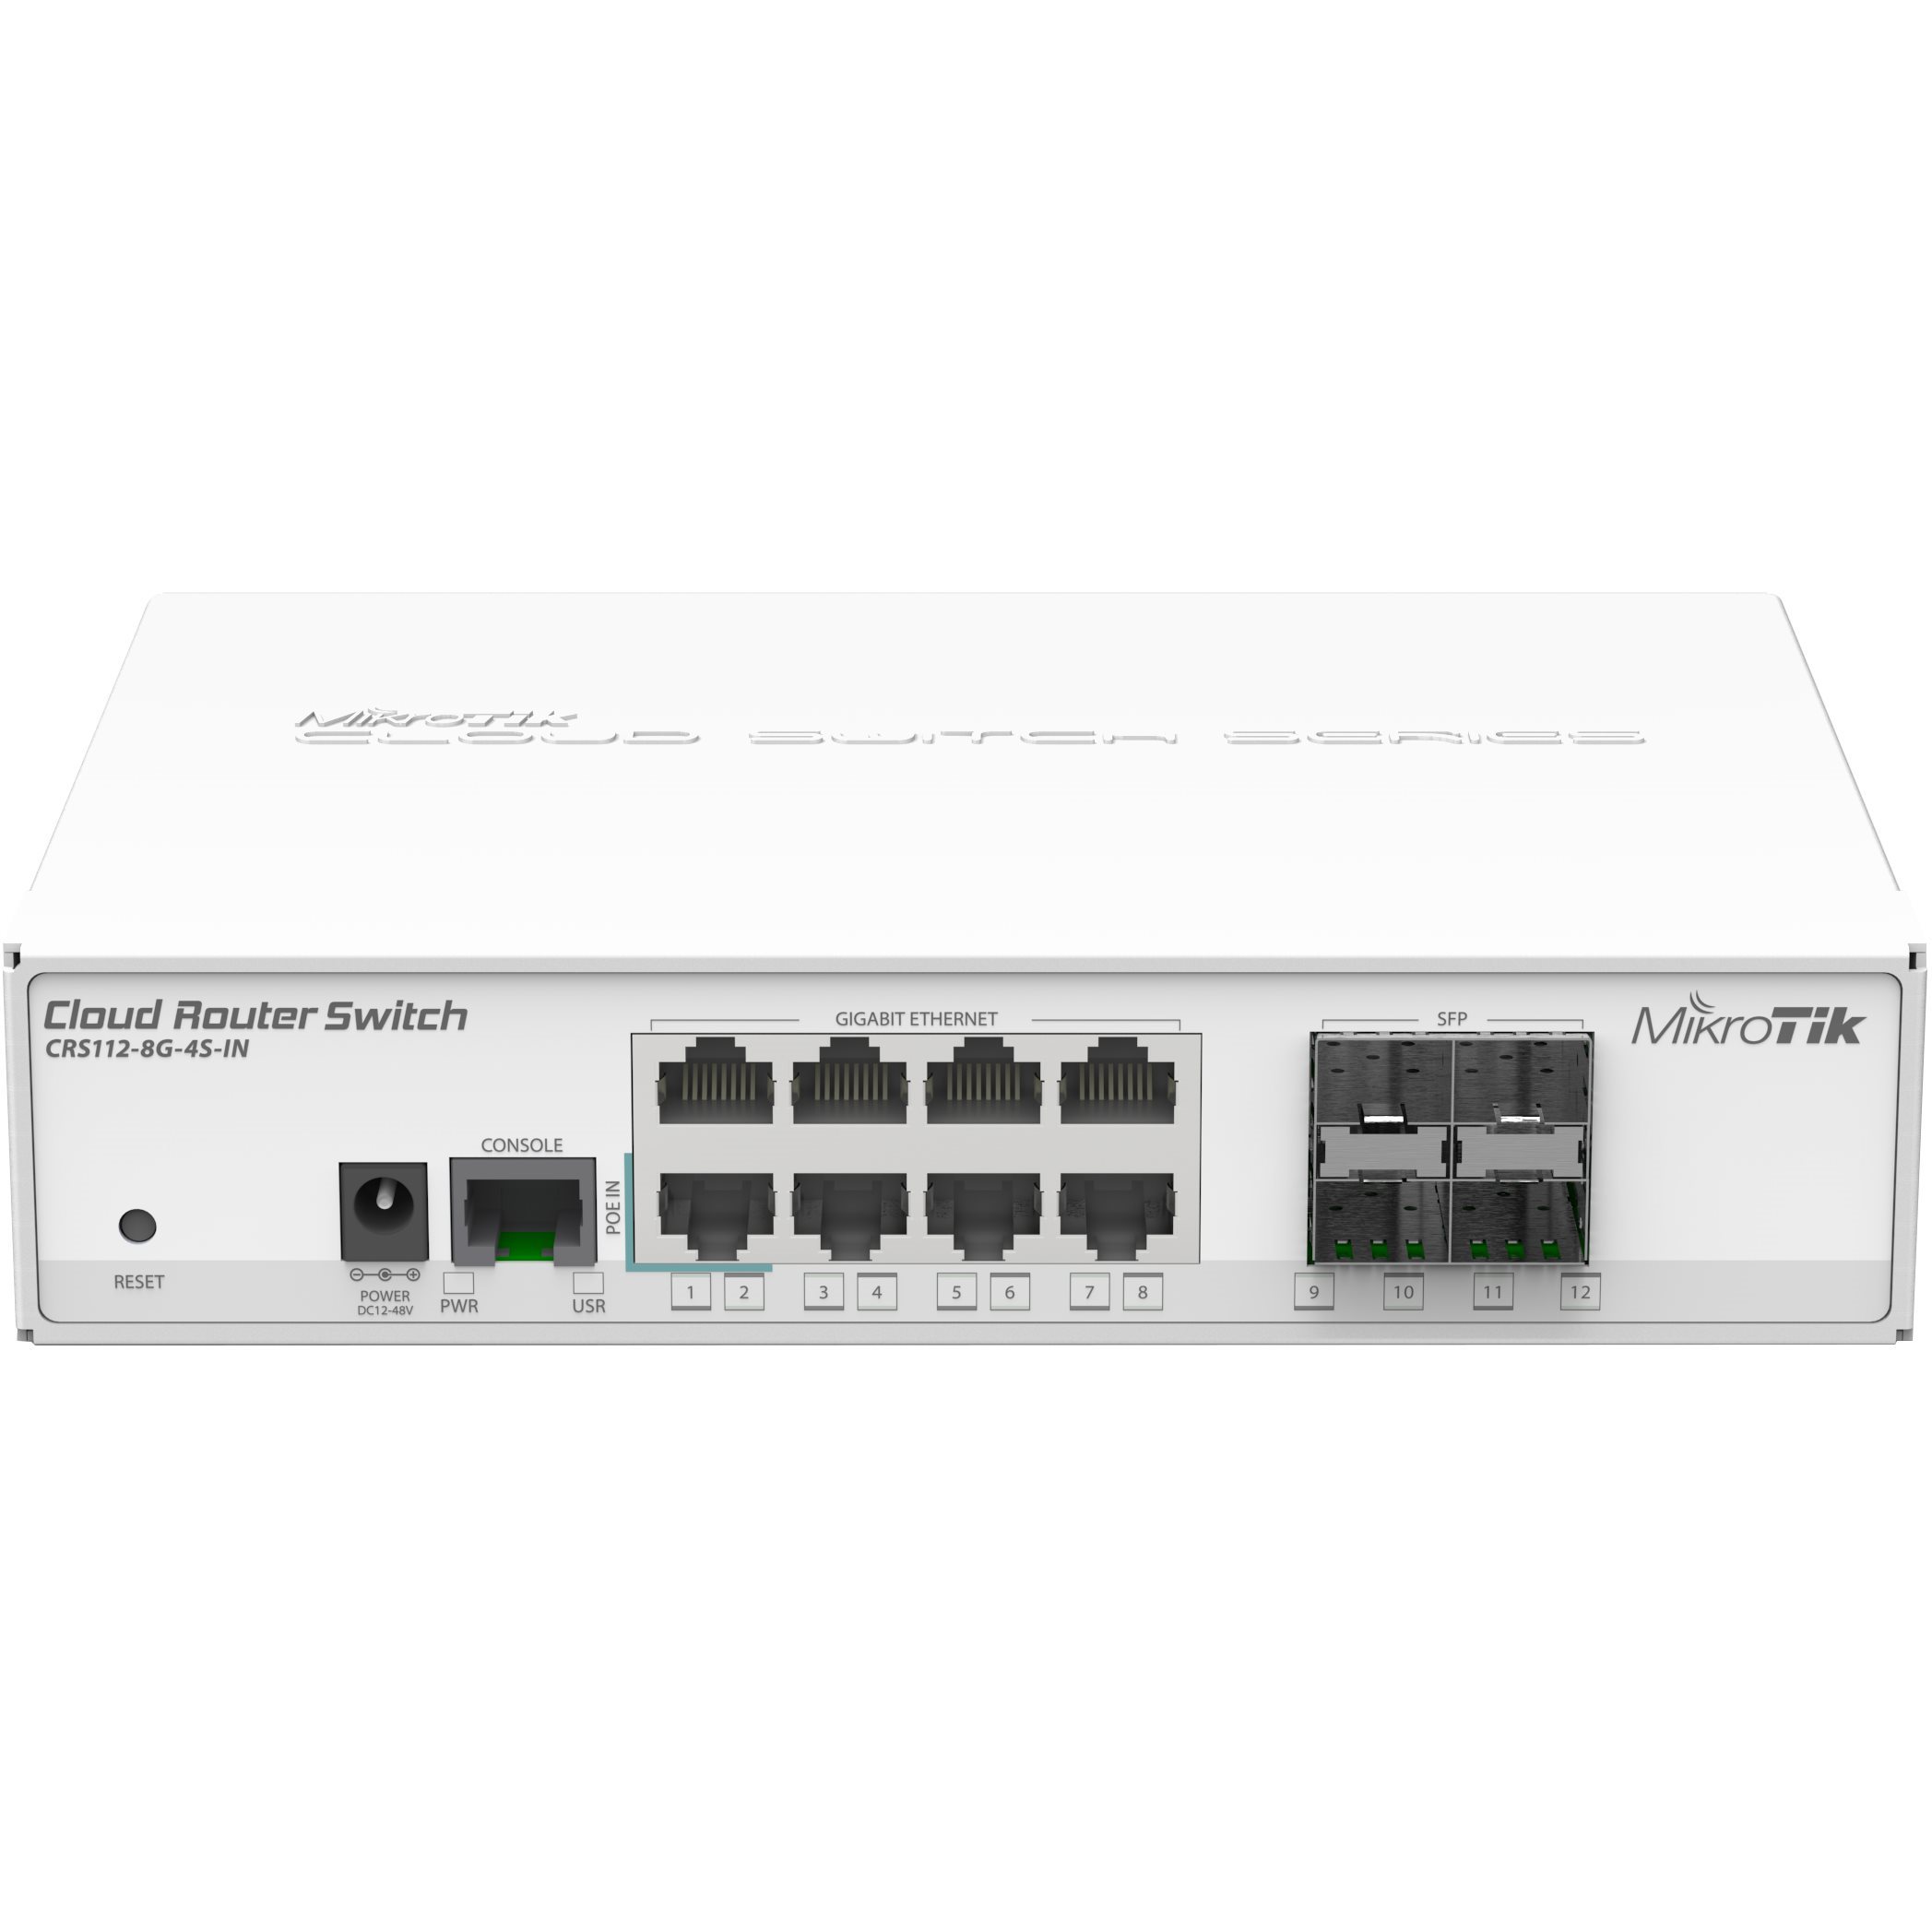   Switch   Switch Cloud 8 Giga 4 SFP dual boot CRS112-8G-4S-IN